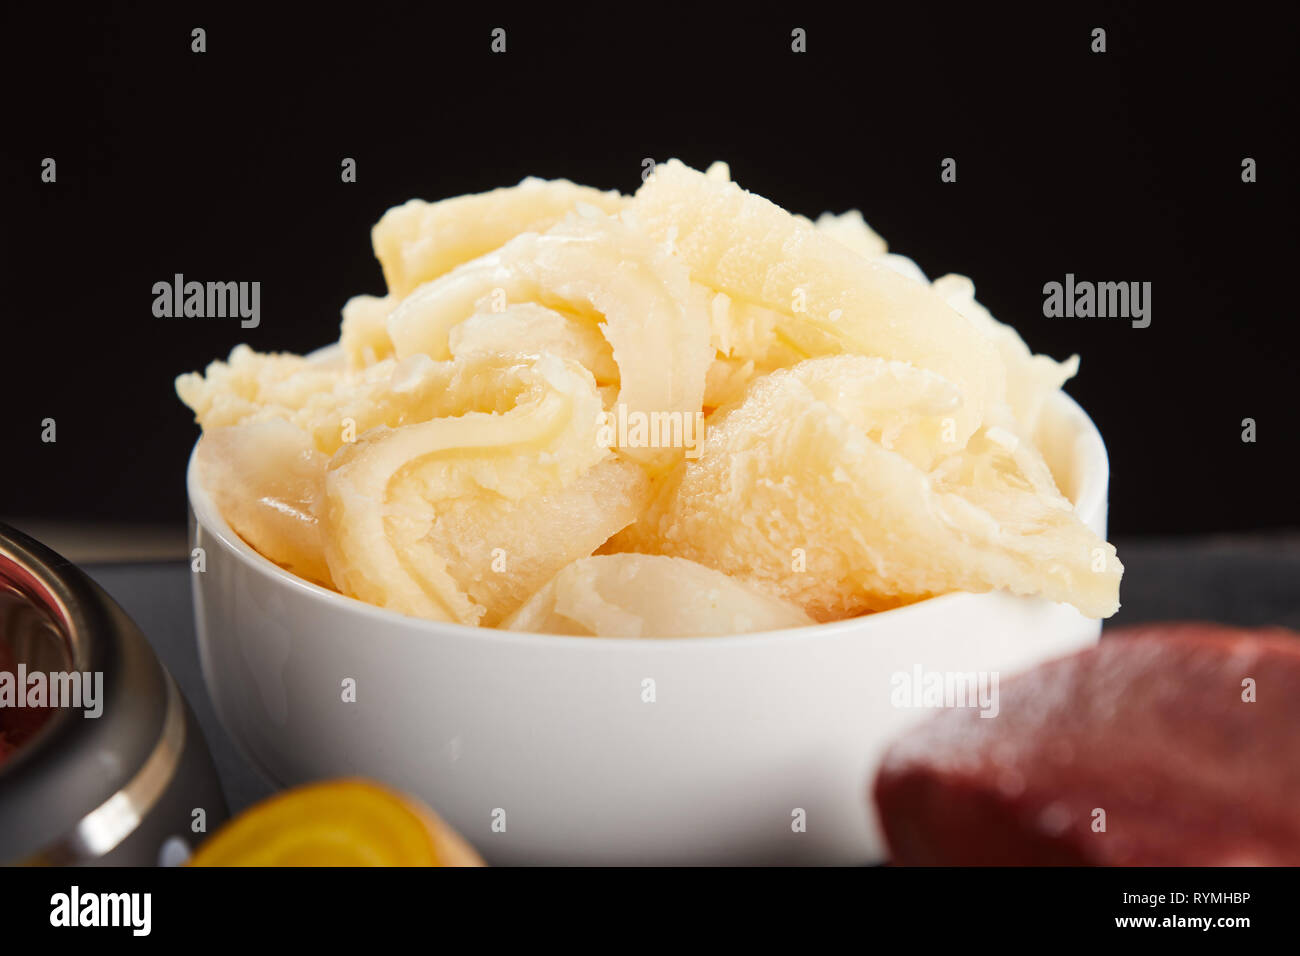 Raw beef stomach pieces in white bowl, viewed in close-up against black background. Preparing food for dogs ingredients Stock Photo